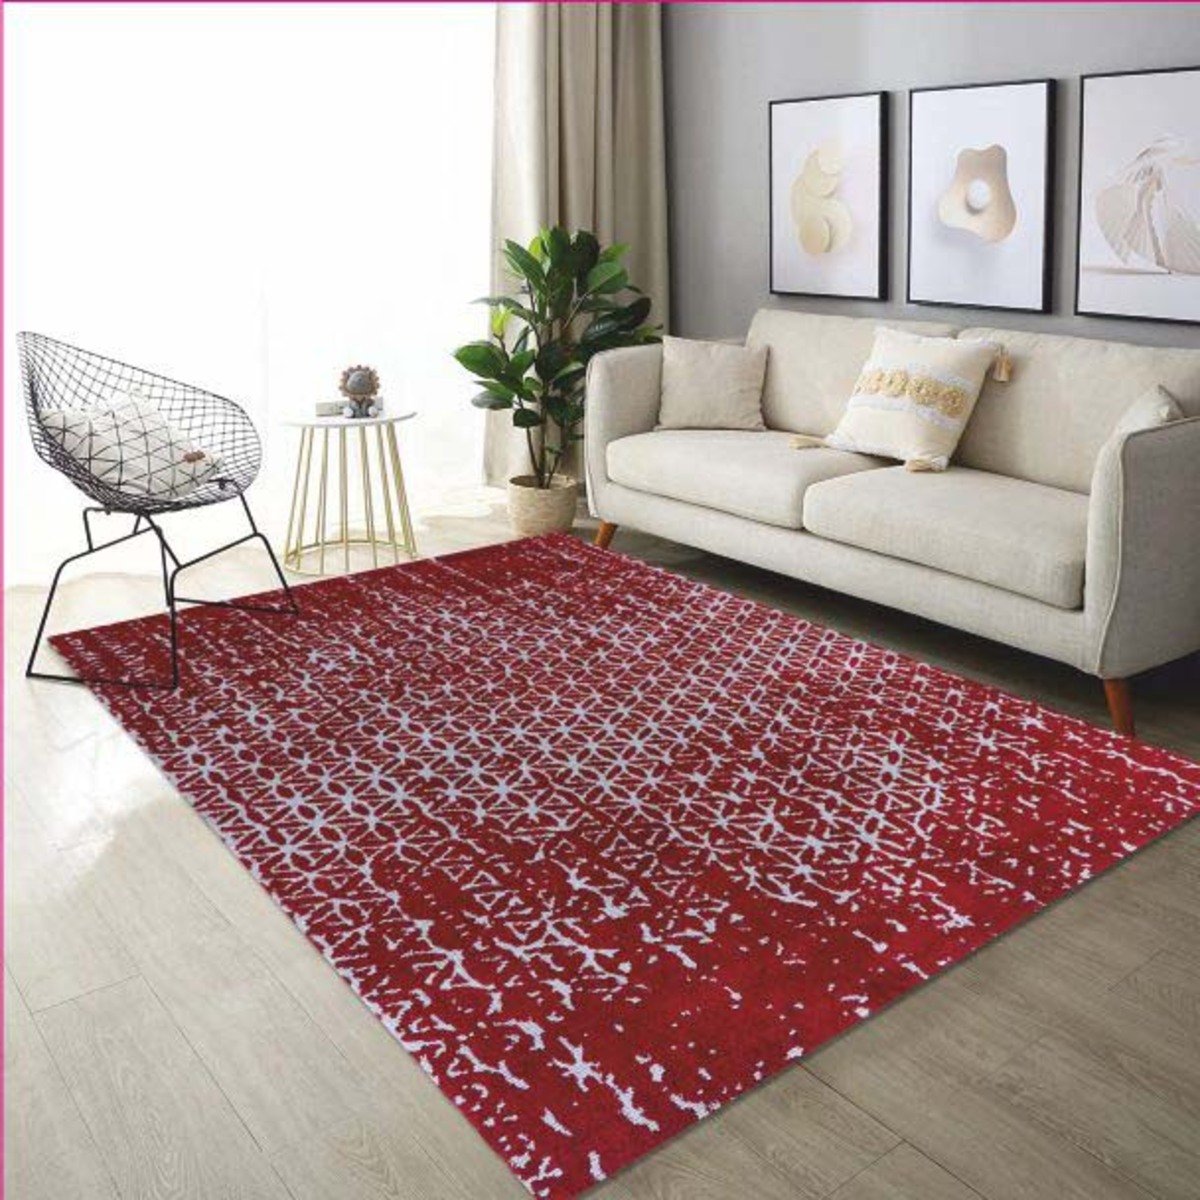 Homewell Knitted Carpet 120x170cm BHD5 Assorted